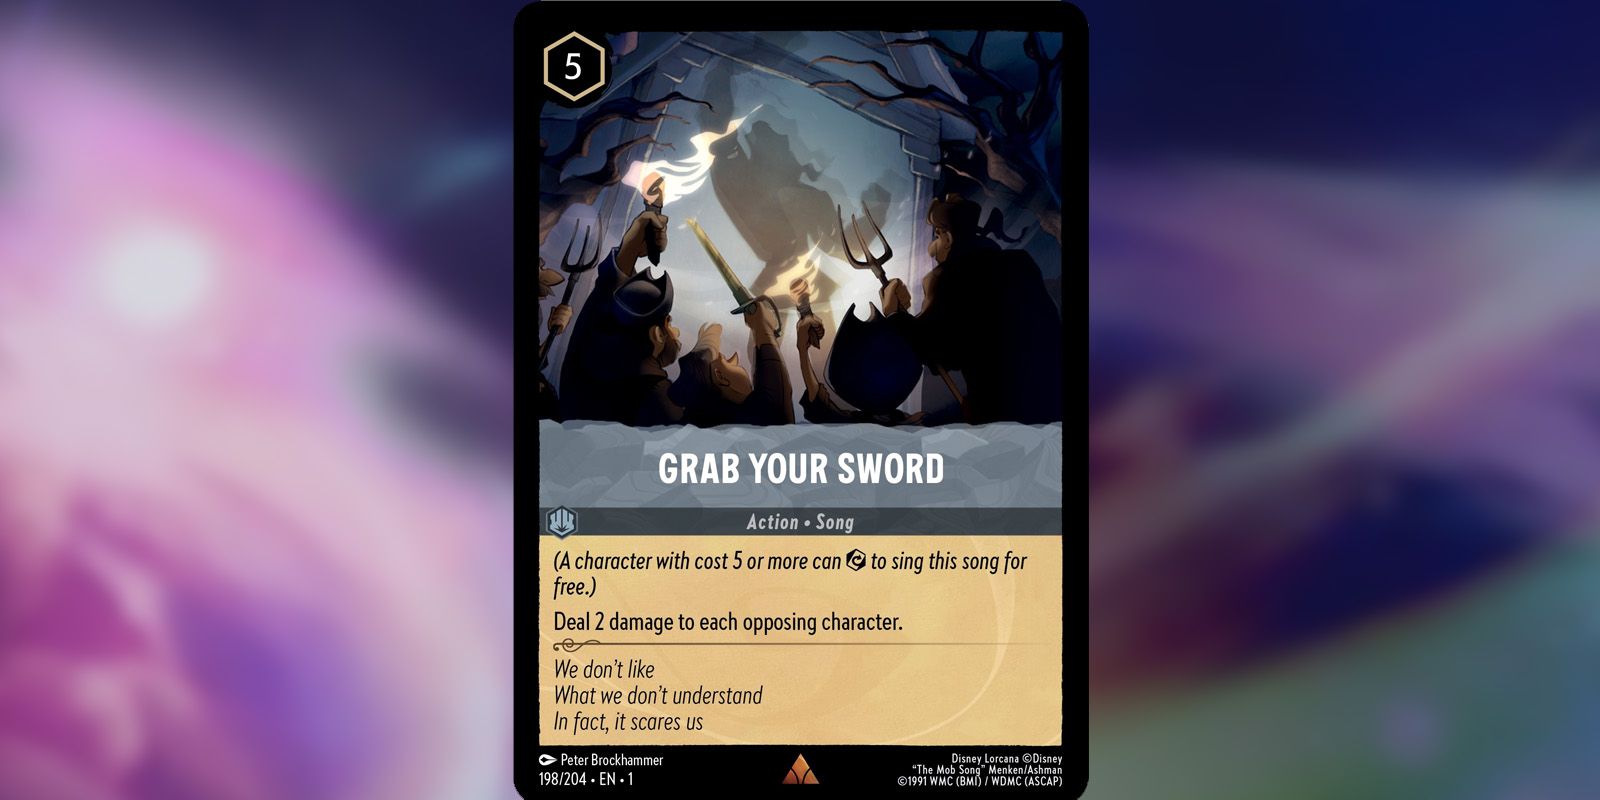 Grab Your Sword Lorcana song card showing Gaston's mob from Beauty and the Beast.